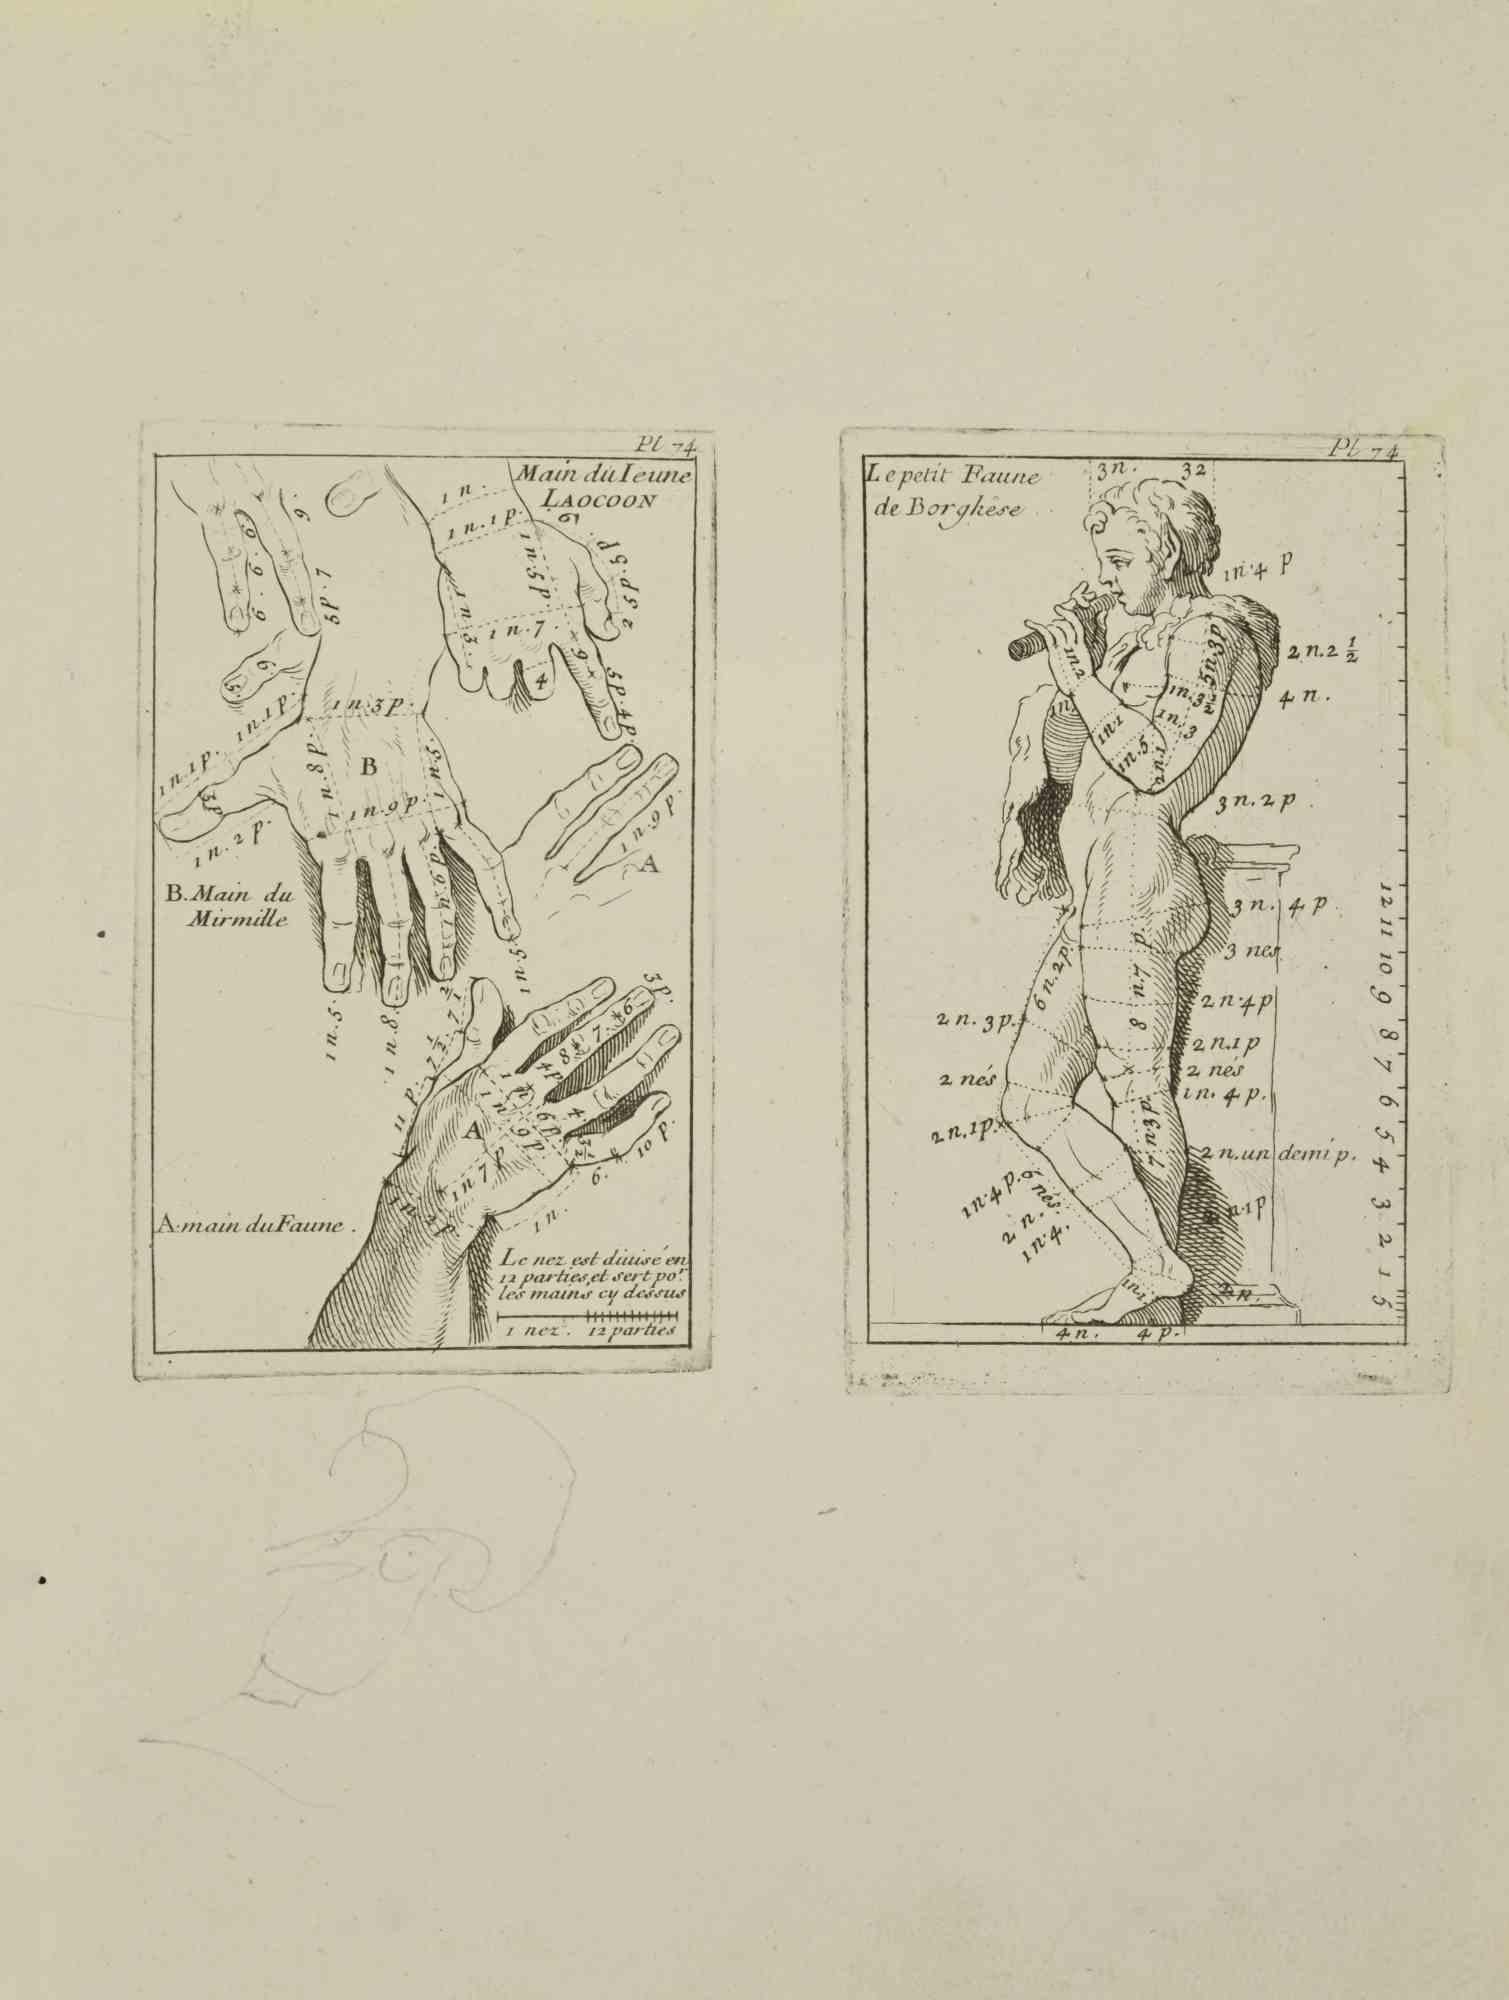 Anatomy Studies is an etching realized by Nicholas Cochin in 1755.

Good conditions with foxing and folding.

The artwork is depicted through confident strokes.

The etching was realized for the anatomy study “JOMBERT, Charles-Antoine (1712-1784) -